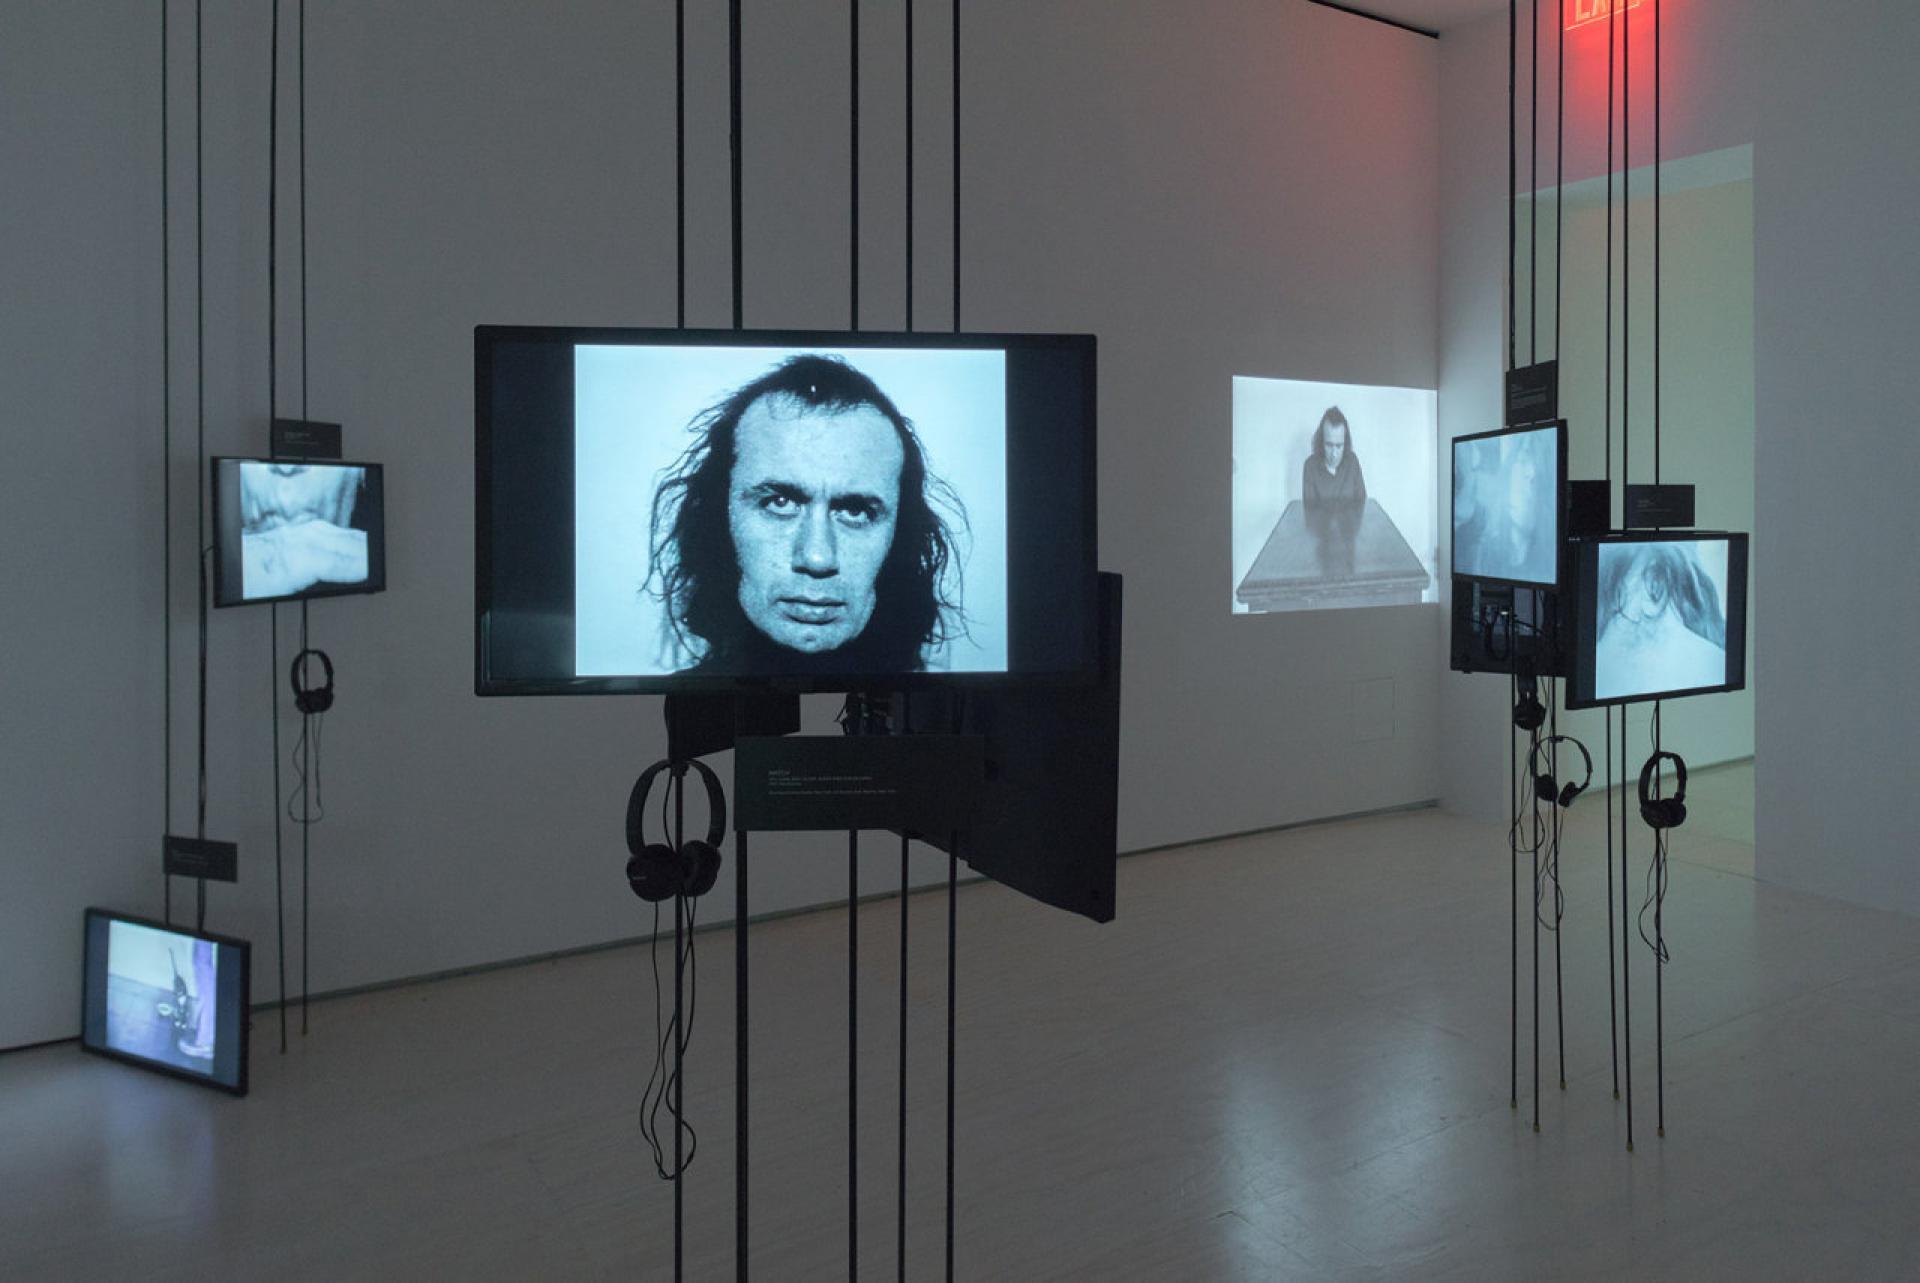 Acconci’s confessional pieces, a series of packed interiors. | Photo via NY Times